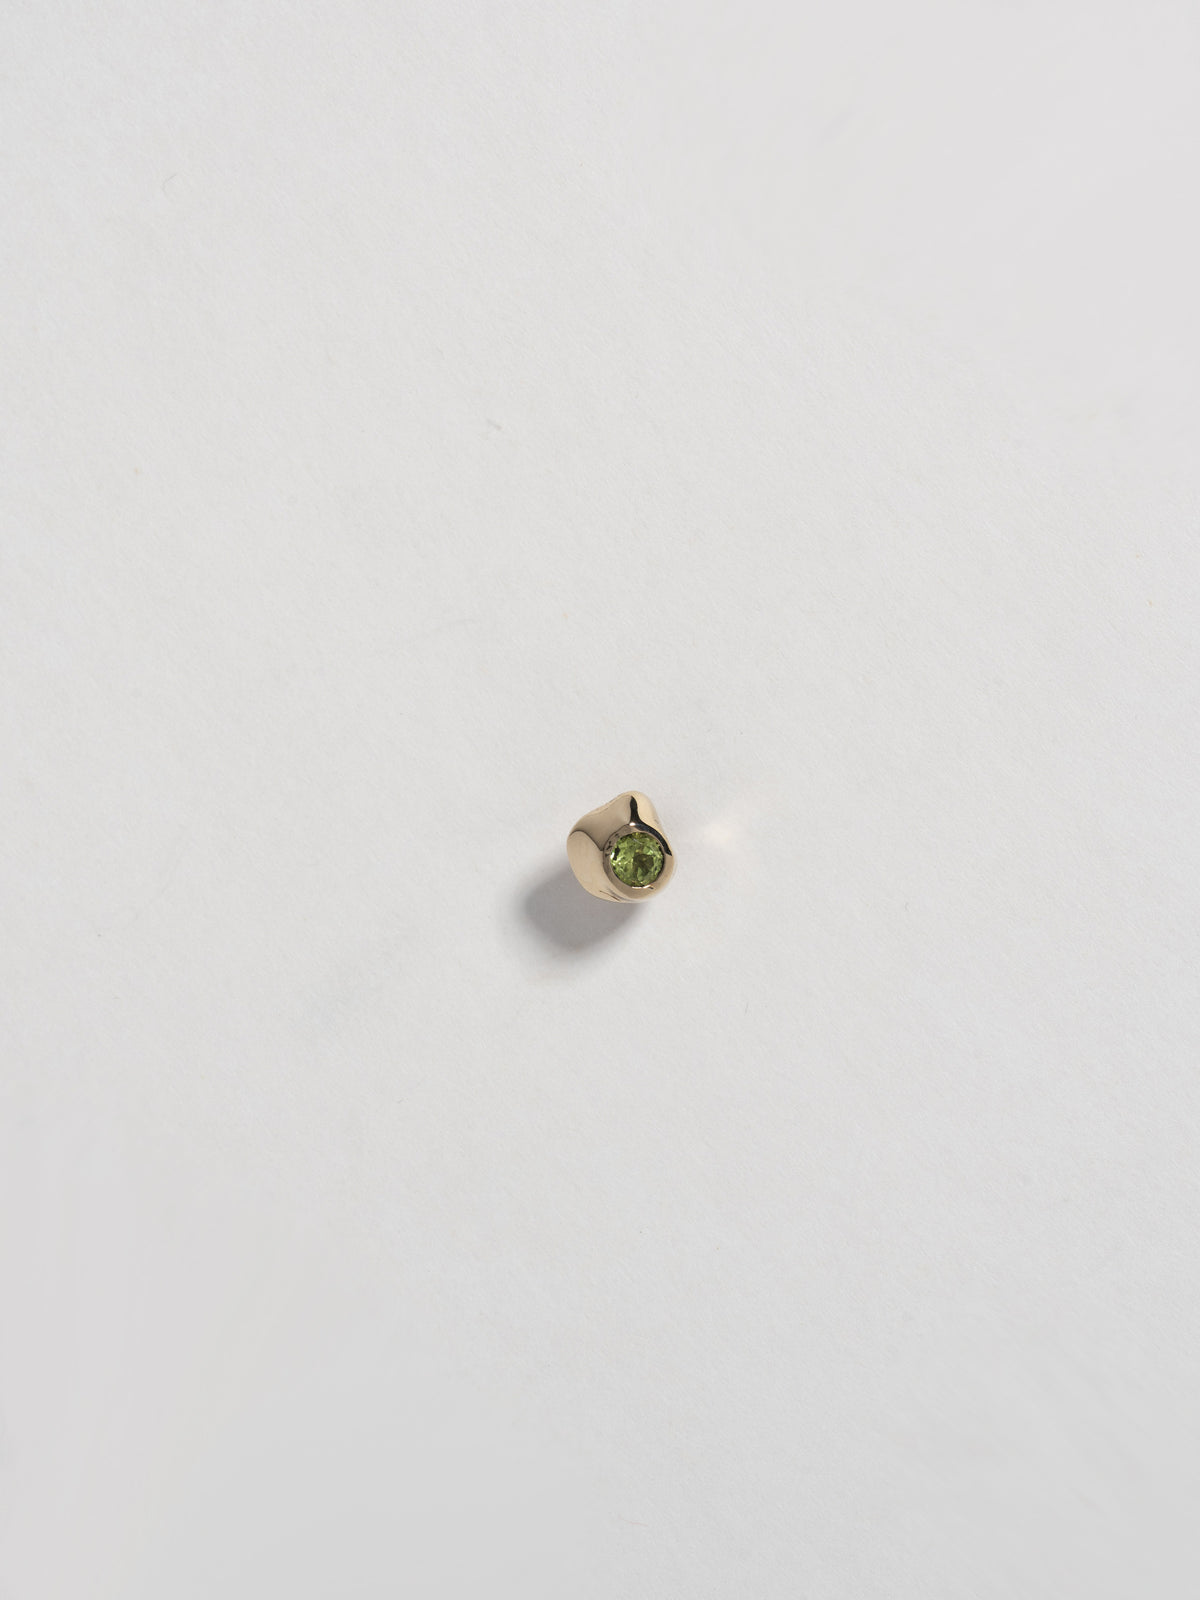 Close up product image of KIRA Stud in 14k gold with peridot, shown on white background (front view)